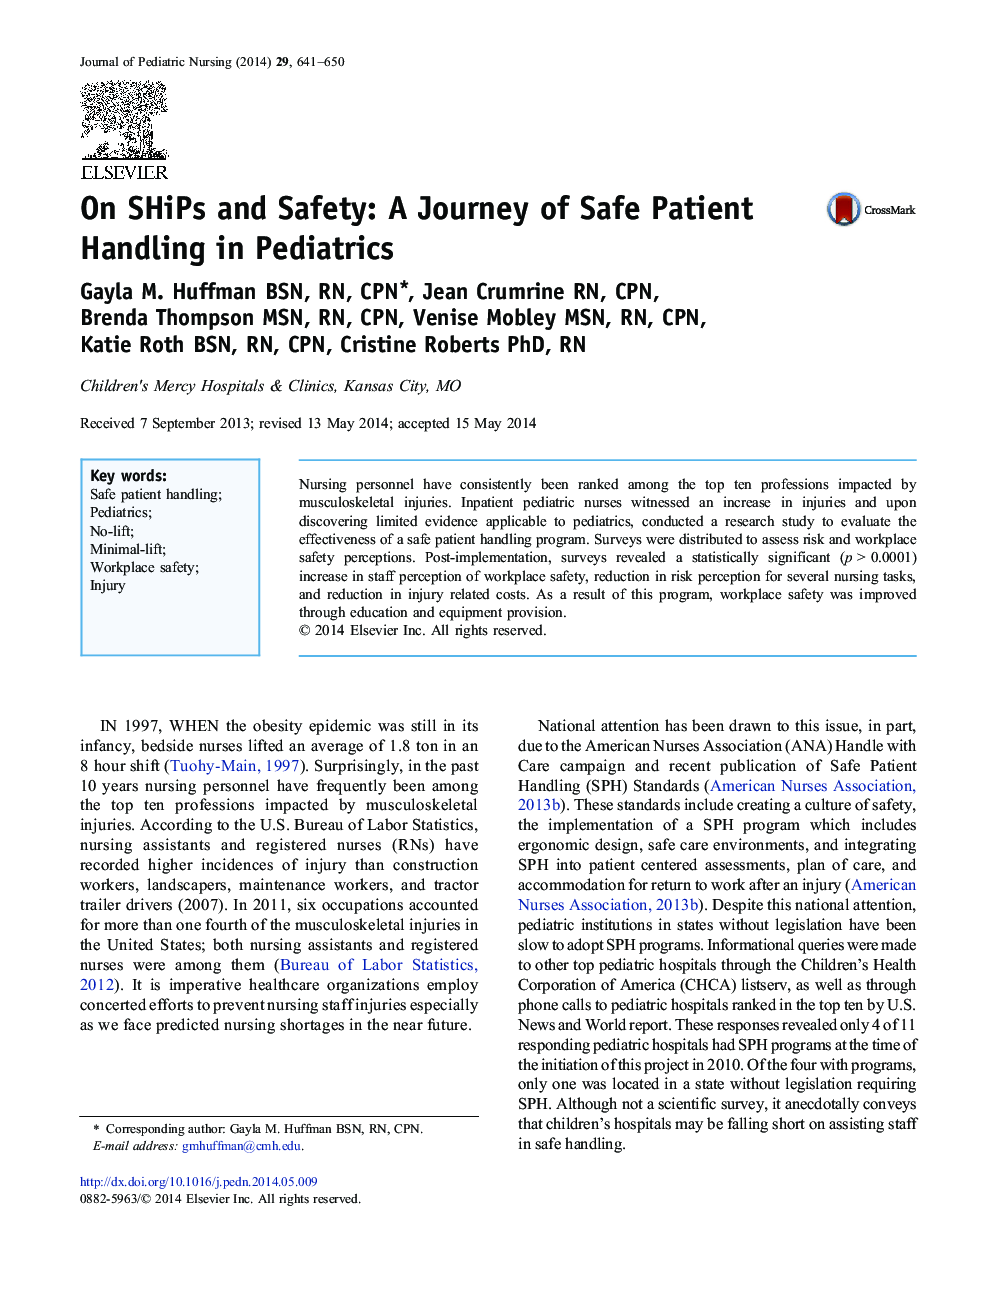 On SHiPs and Safety: A Journey of Safe Patient Handling in Pediatrics